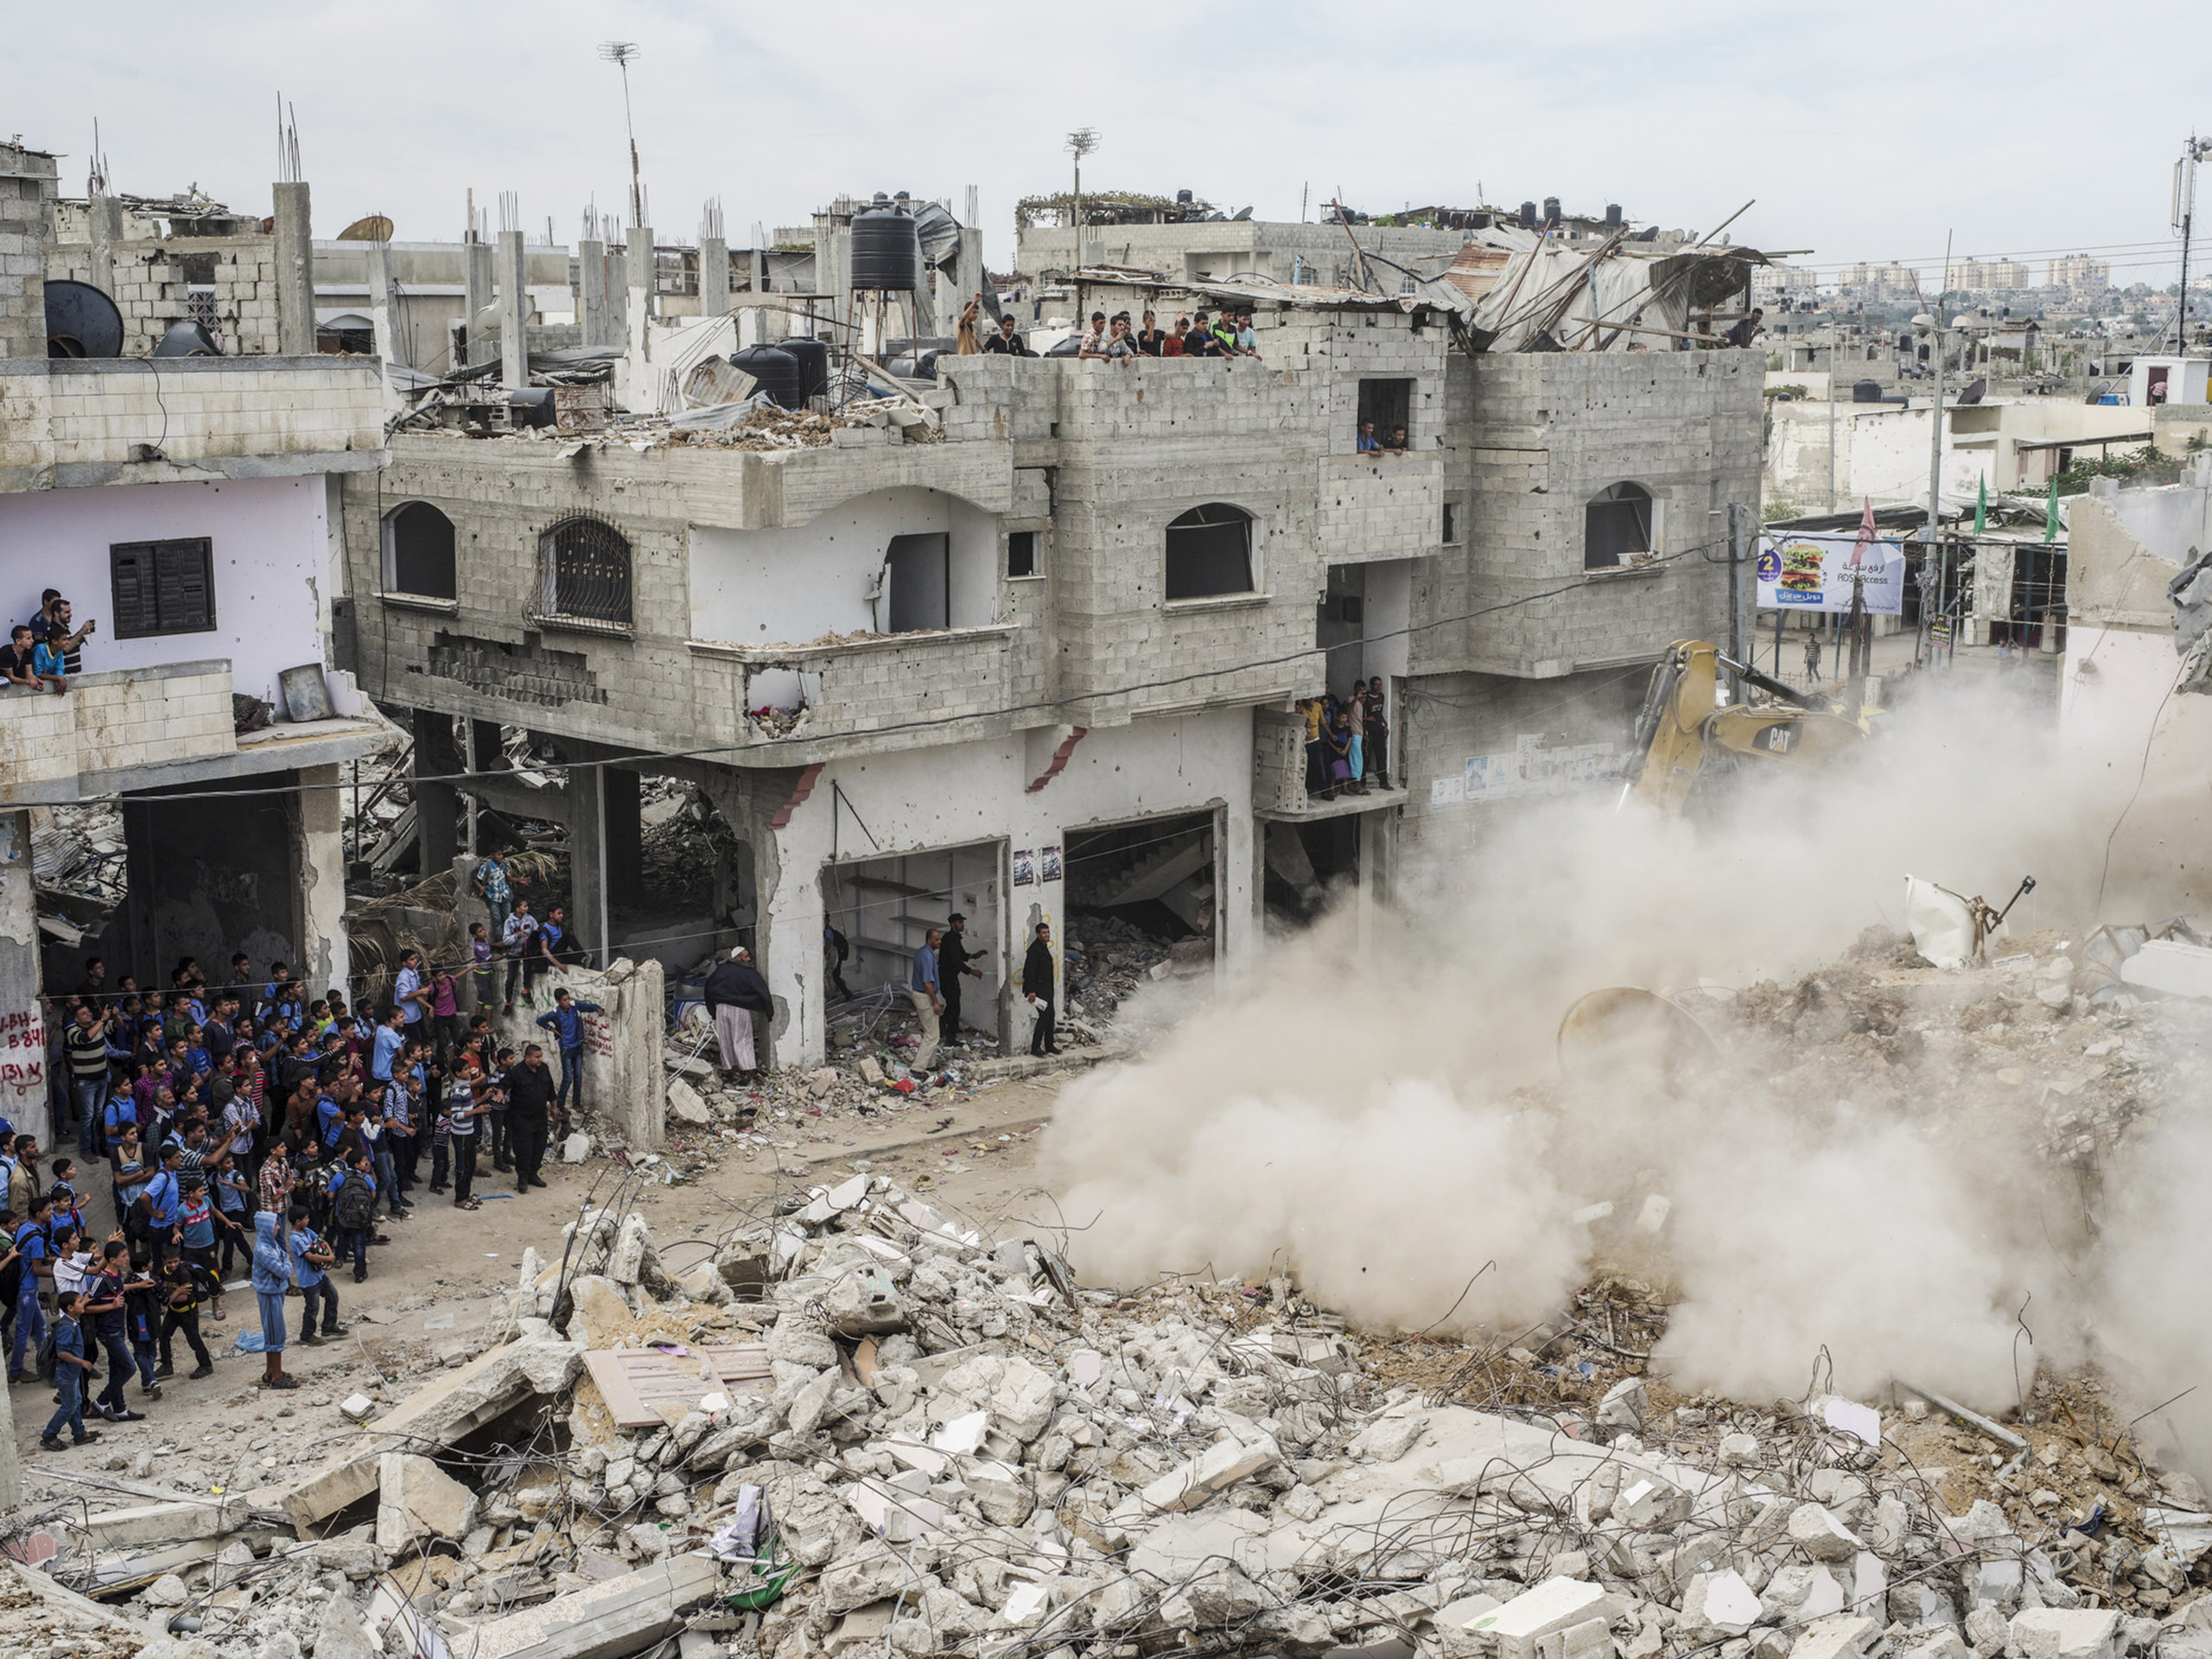 A crowd watches as a destroyed home is knocked down in Beit Hanoun, Gaza.